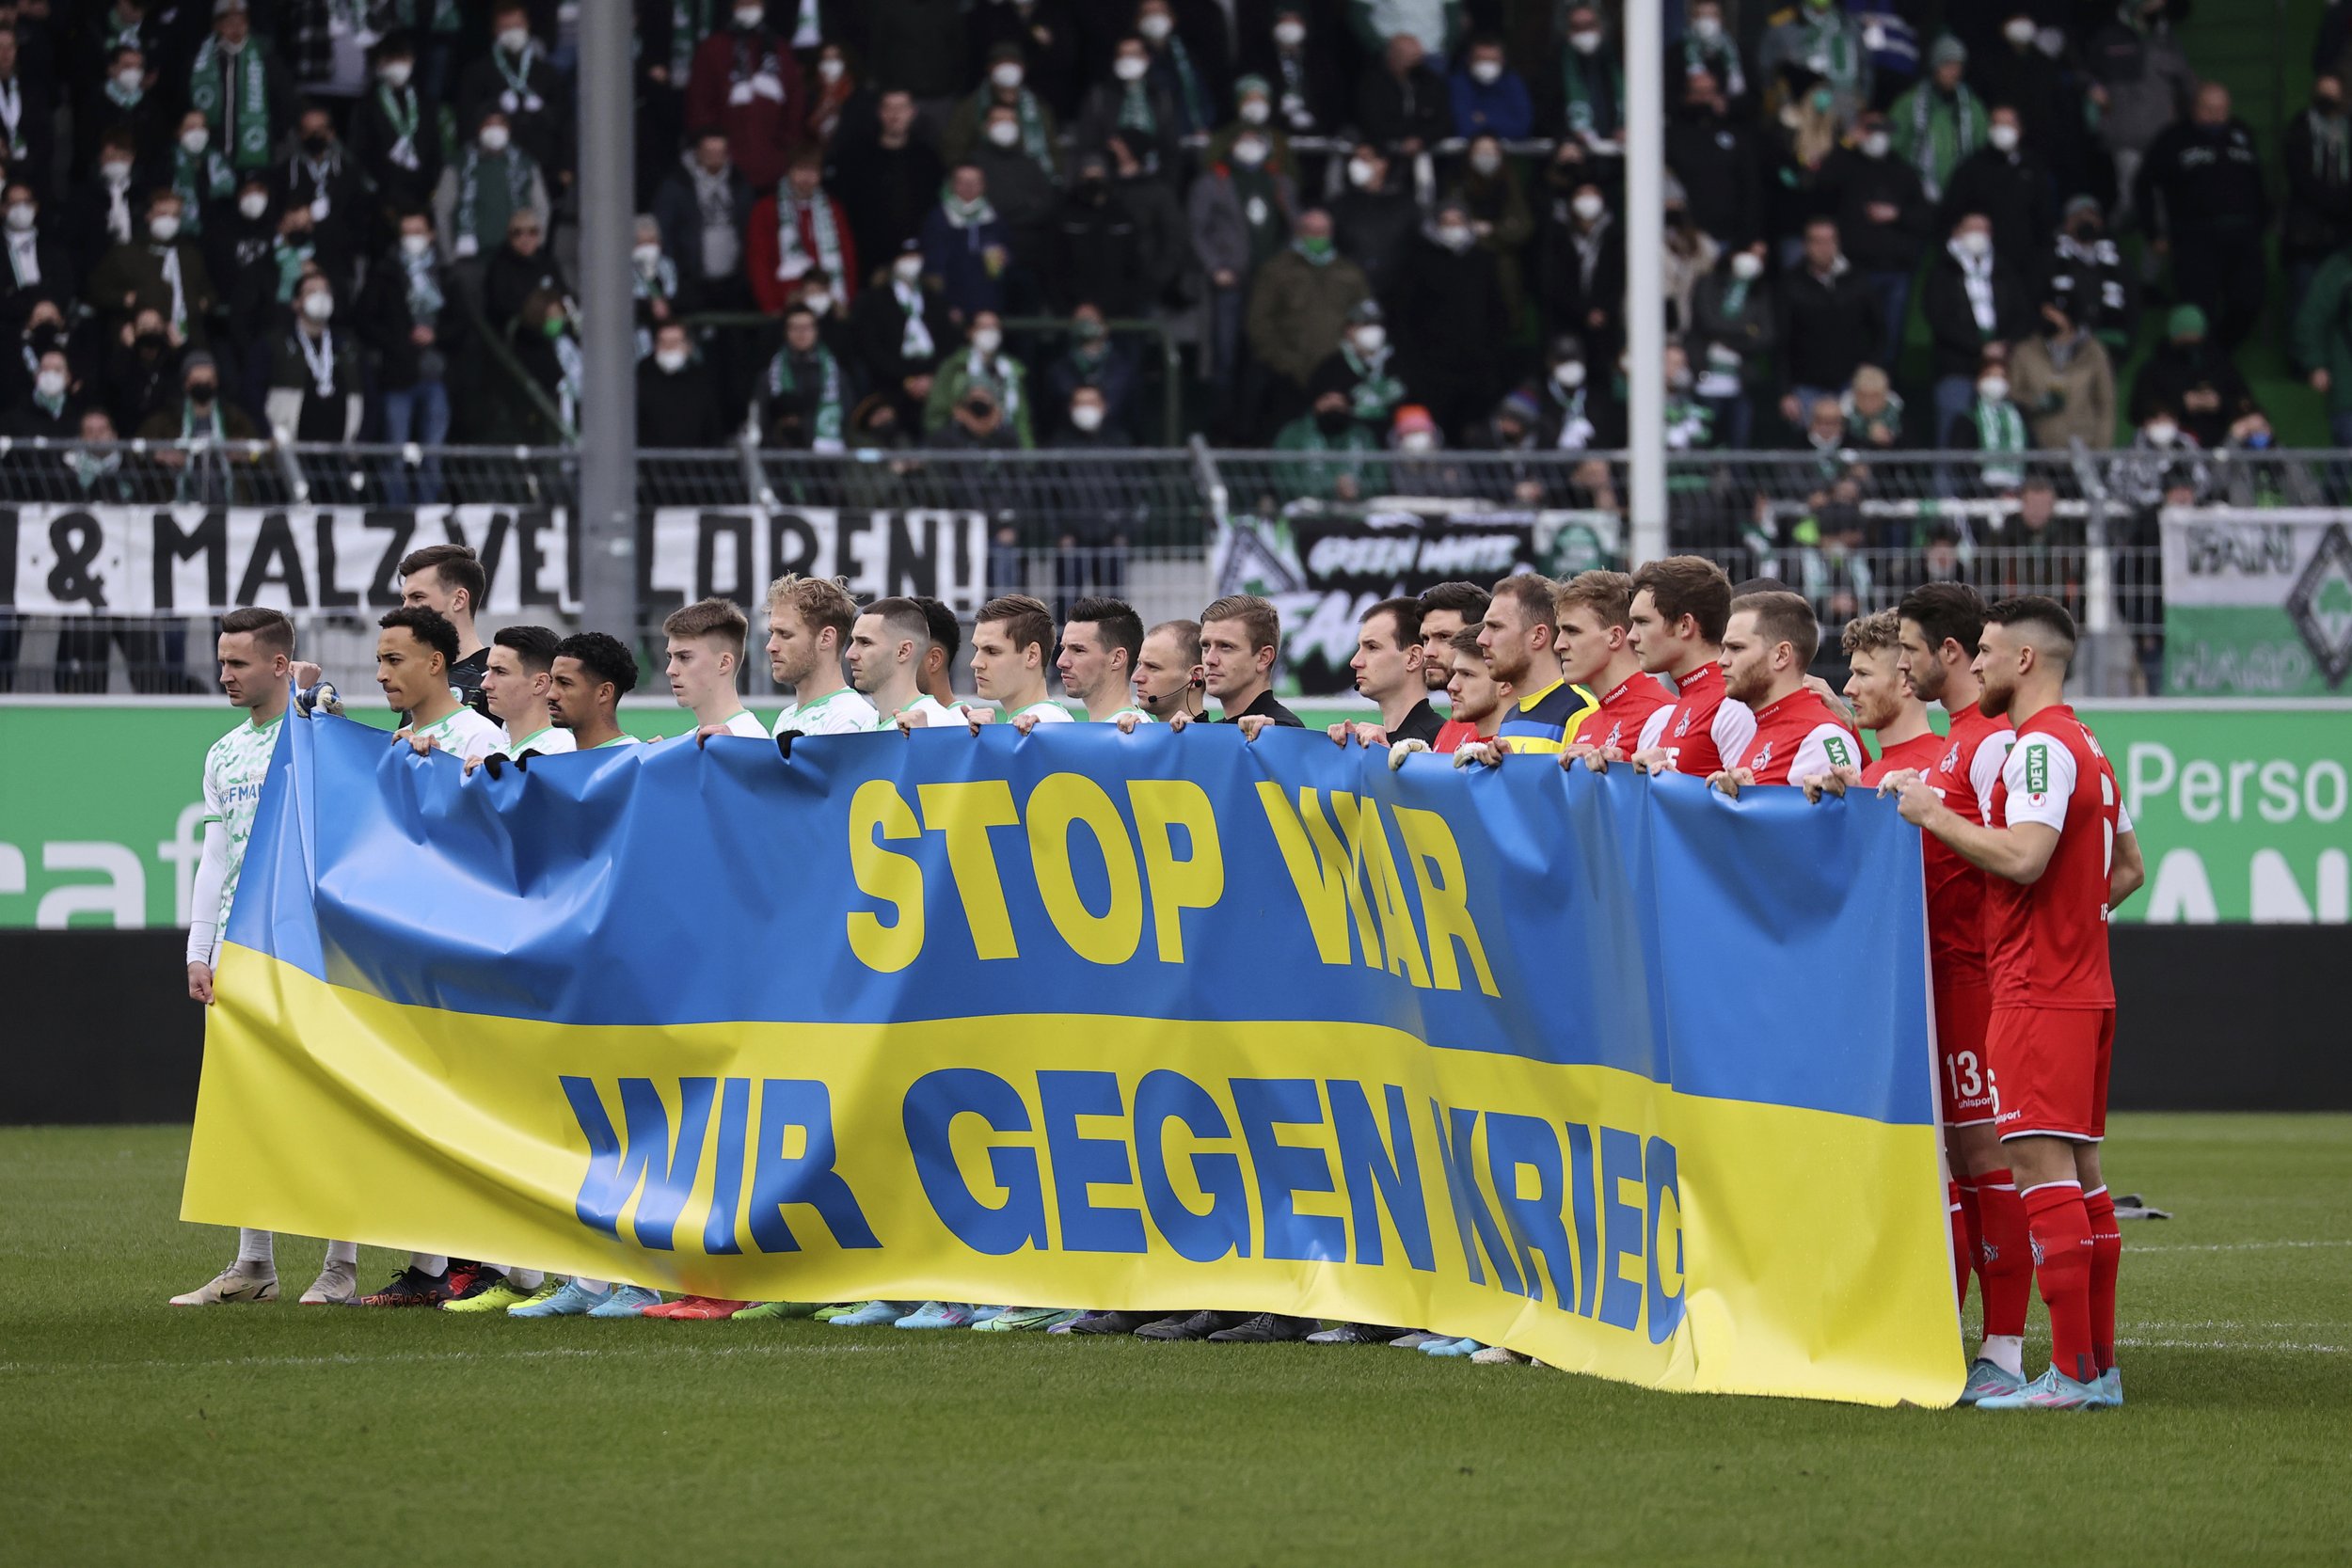  At the start of the match, the players of both teams hold a Ukrainian flag with the inscription "Stop War. We against war." prior the Bundesliga soccer match between Greuther Fuerth and 1. FC Cologne in Fuerth, Germany, Feb. 26, 2022. (Daniel Karman